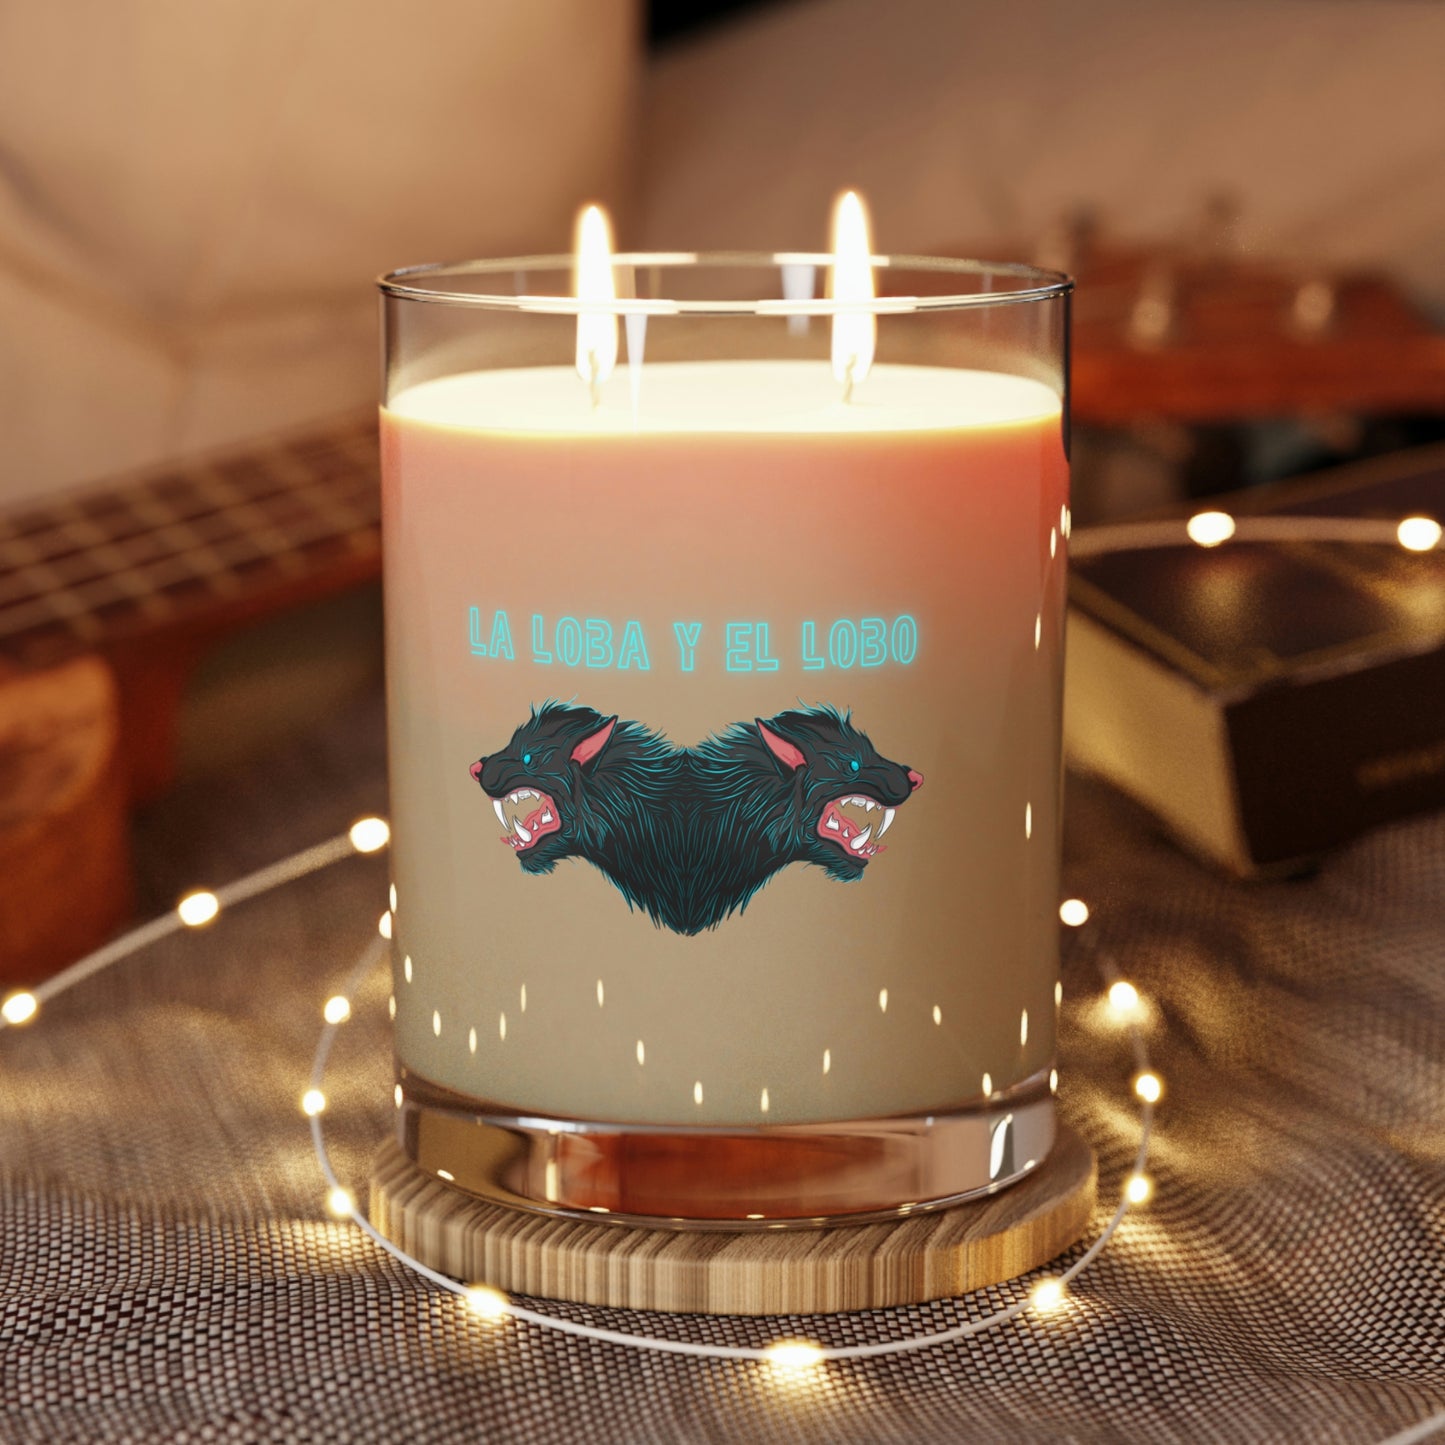 Lobo Scented Candle - Full Glass, 11oz